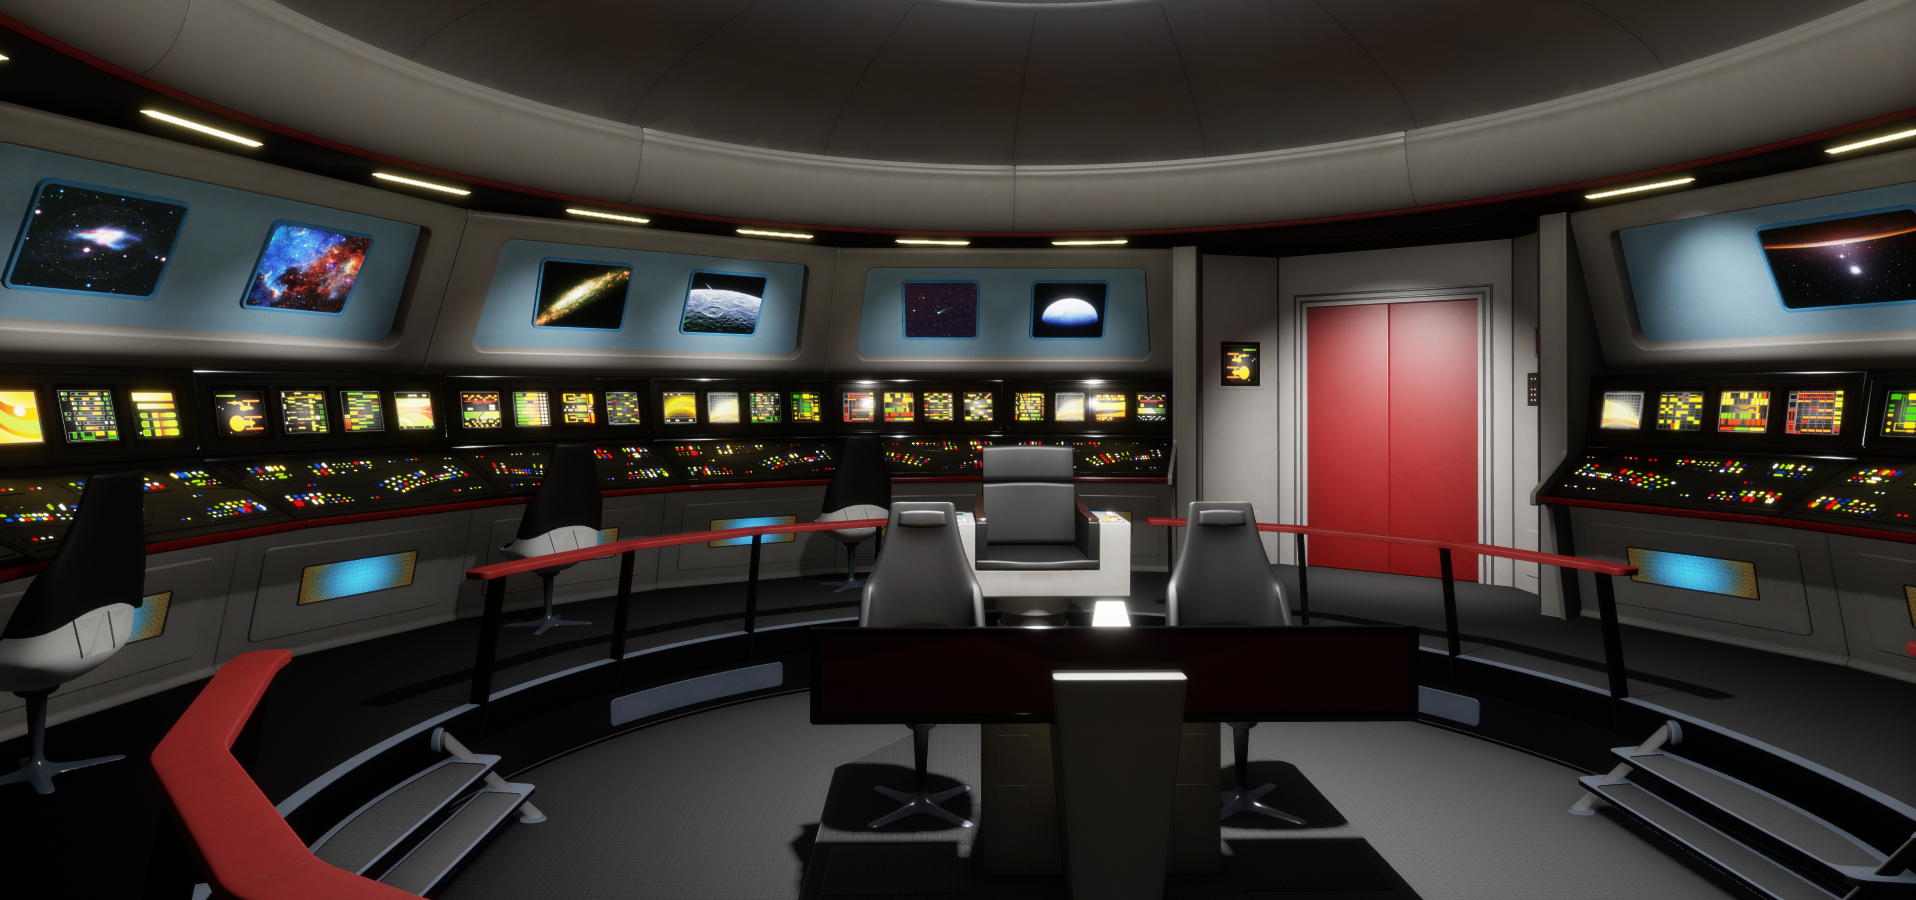 The Bridge of the Enterprise</a><br> by <a href='/profile/Bling-King/'>Bling King</a>